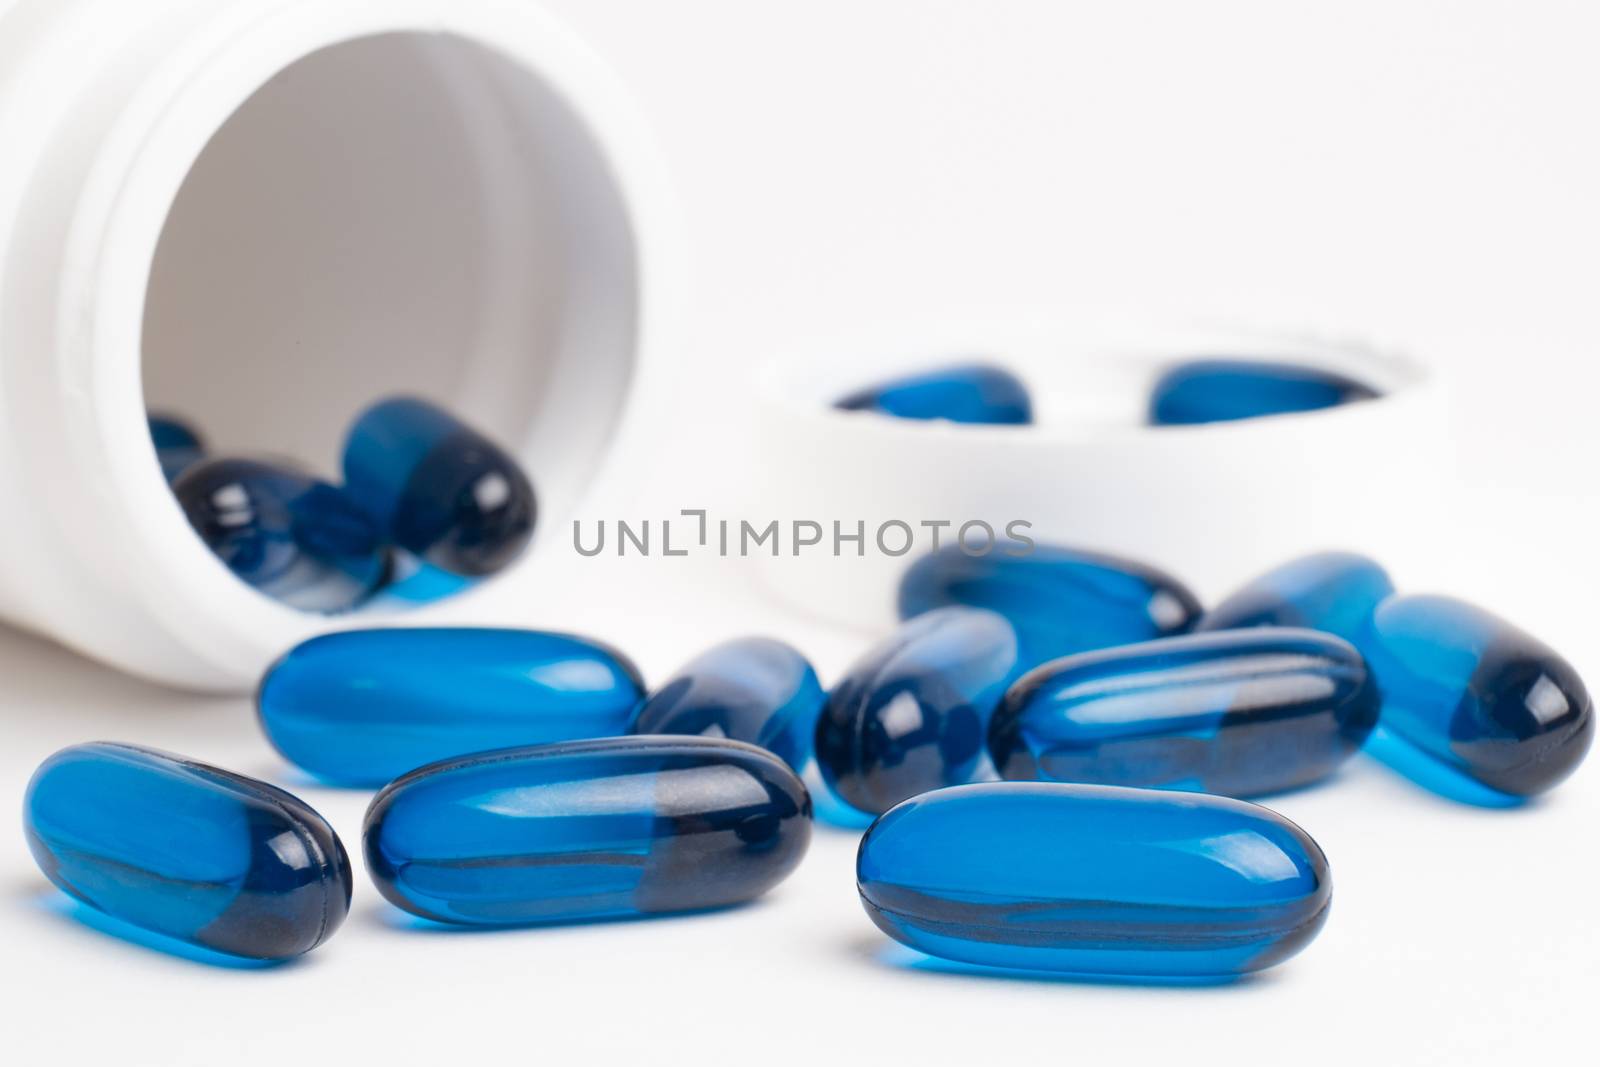 pills of vitamin and medicine on white background